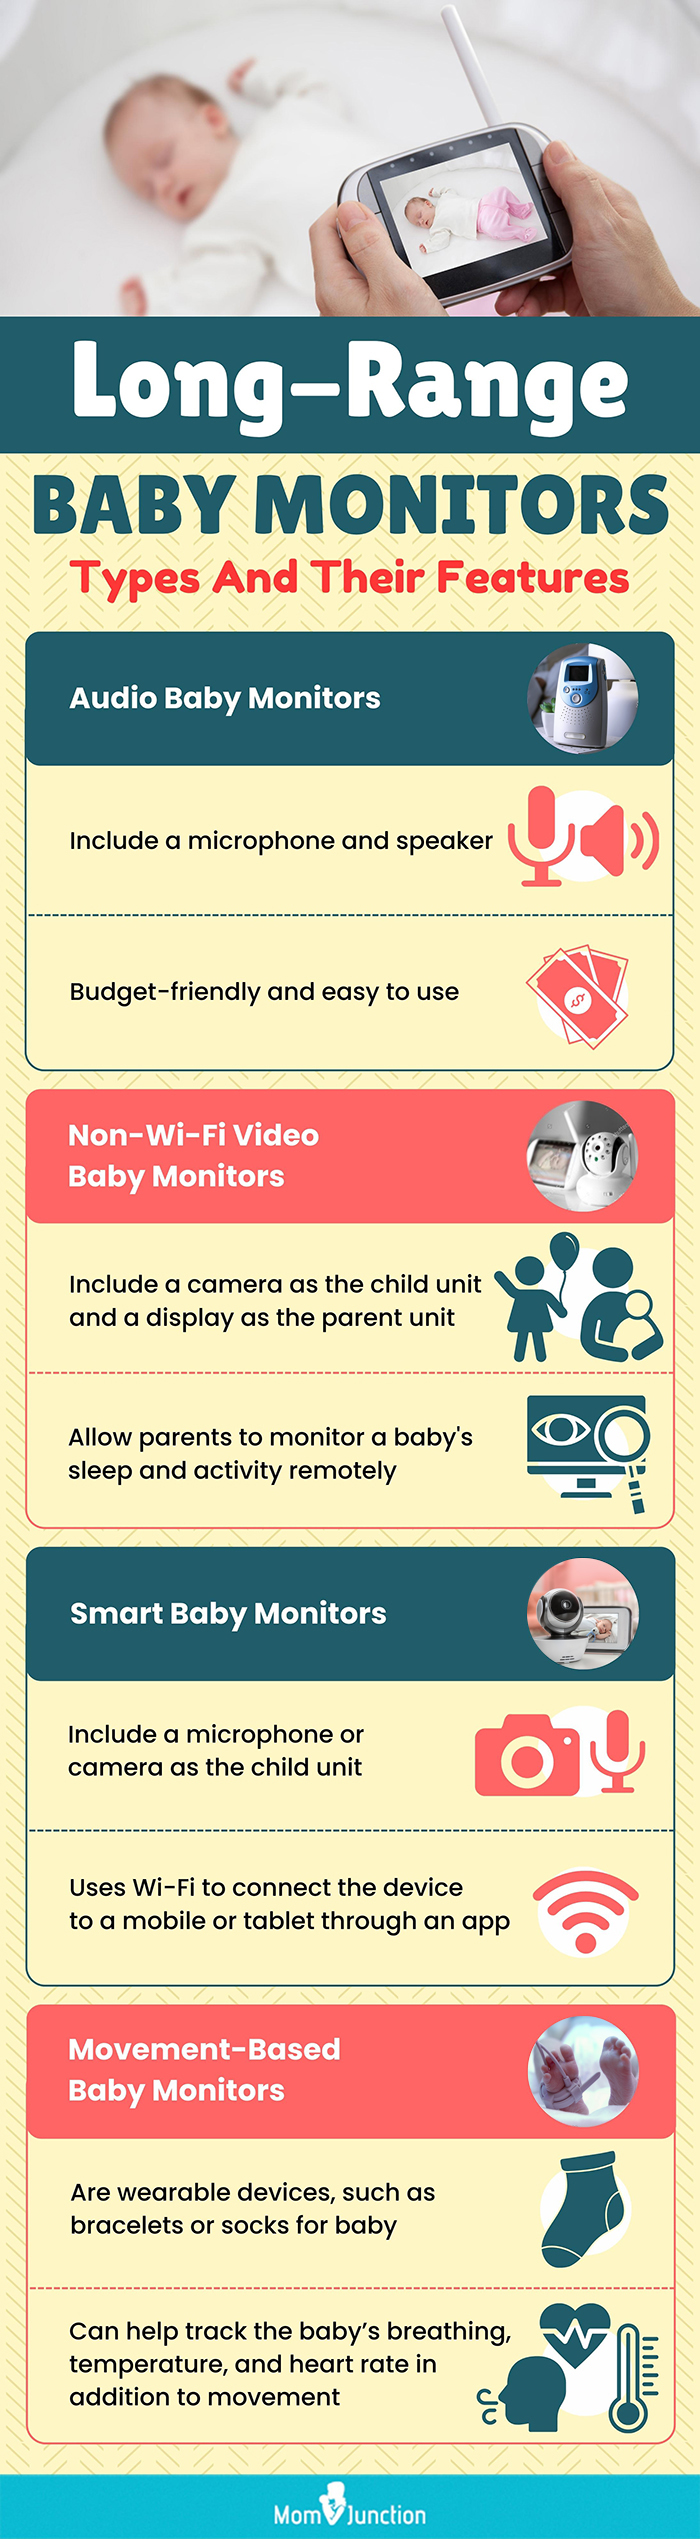 Long-Range Baby Monitors Types And Their Features (infographic)